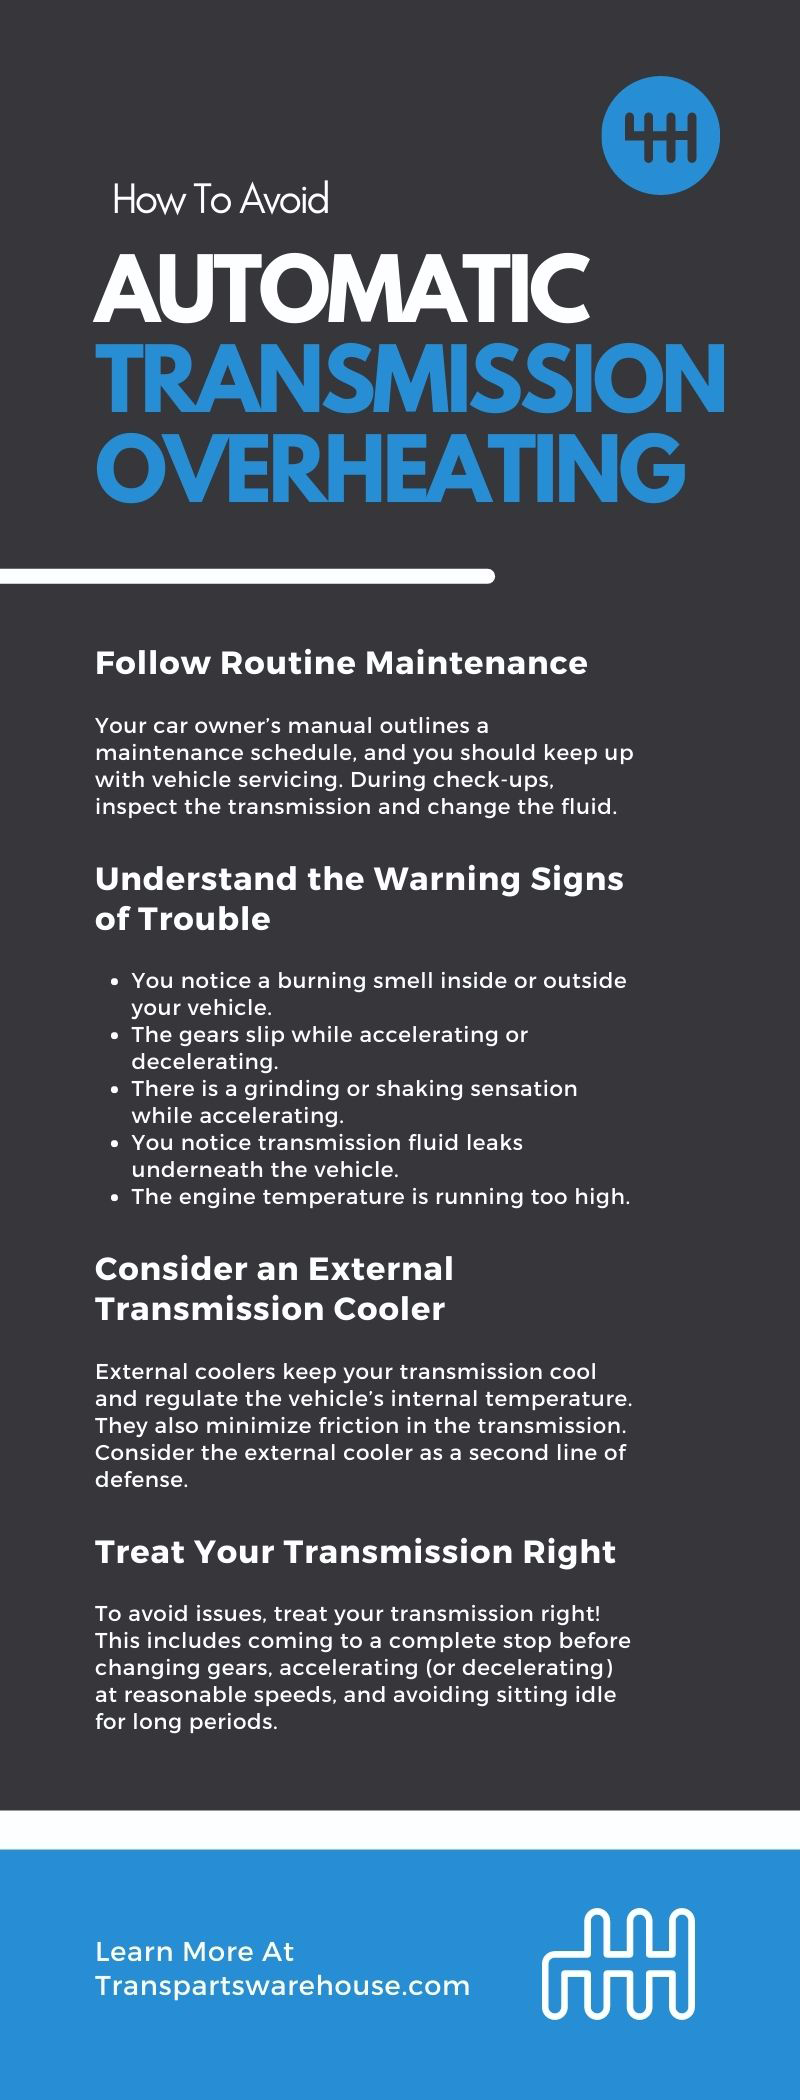 How To Avoid Automatic Transmission Overheating